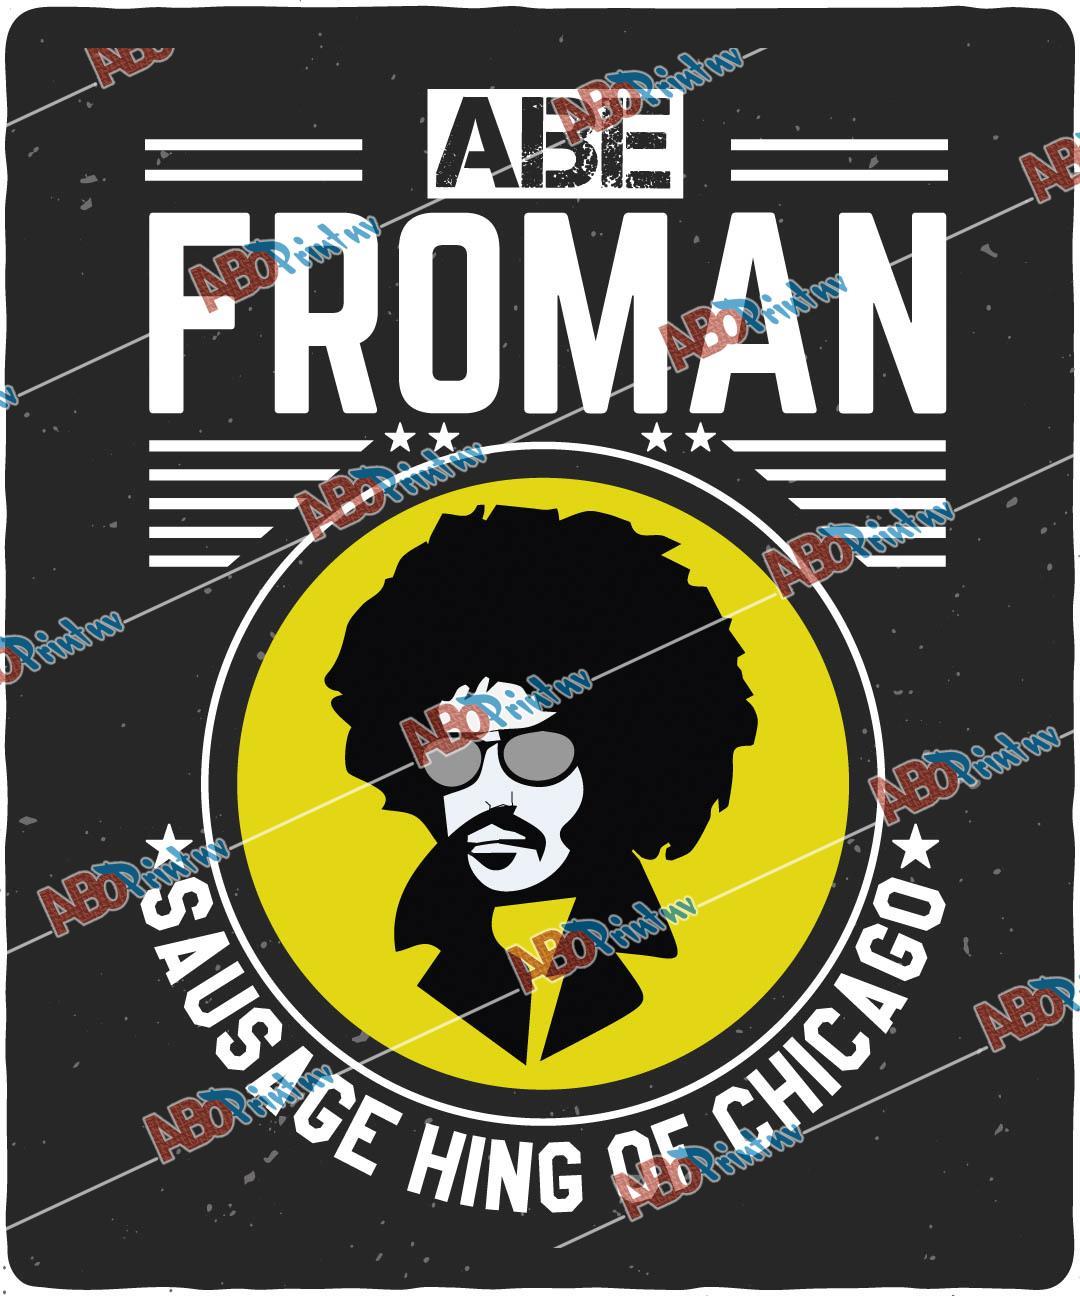 ABC sausage king of chicago froman.jpg